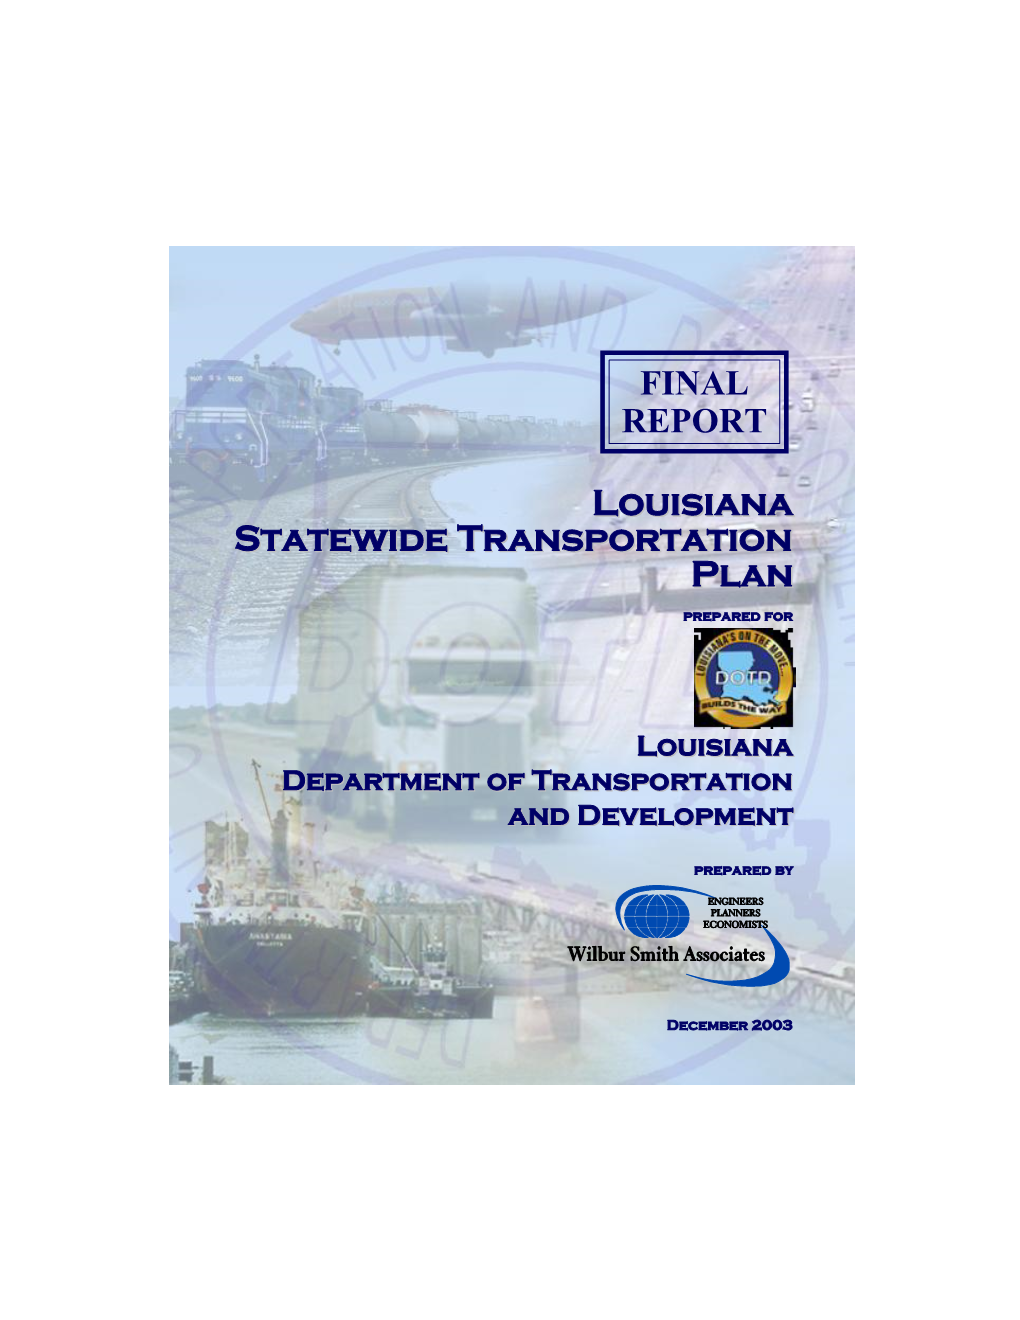 Louisiana Statewide Transportation Plan Prepared For